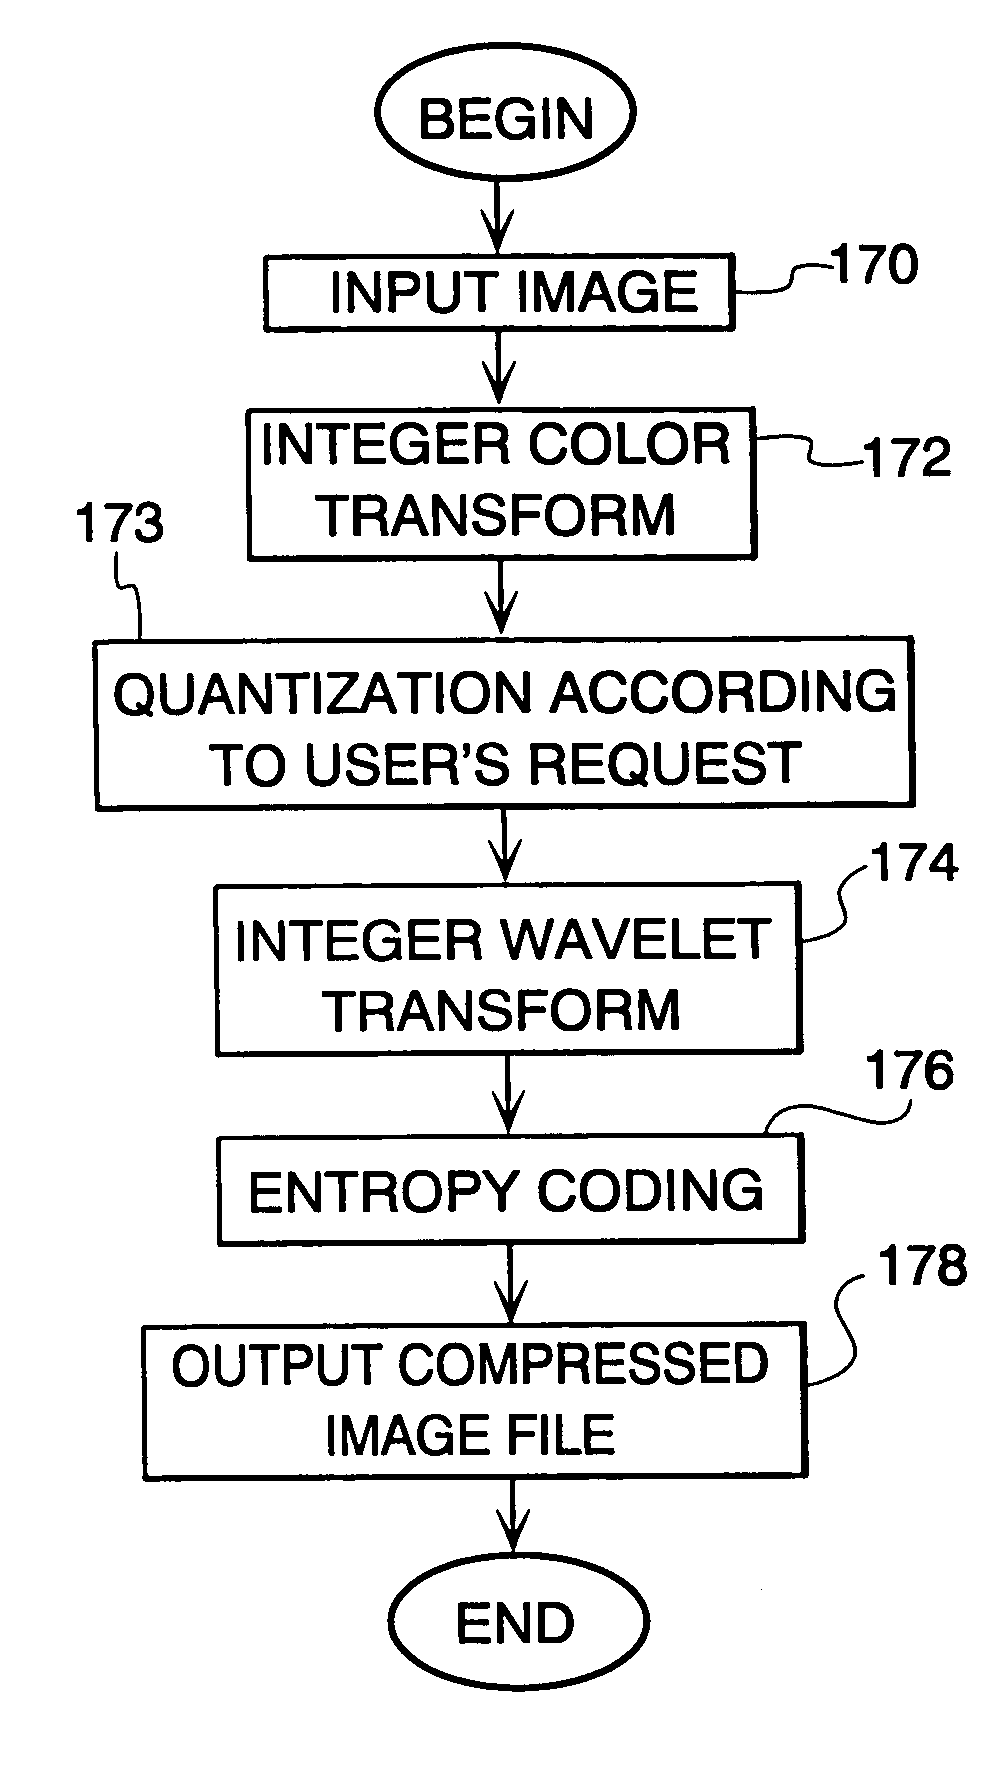 Image compression and decompression based on an integer wavelet transform using a lifting scheme and a correction method